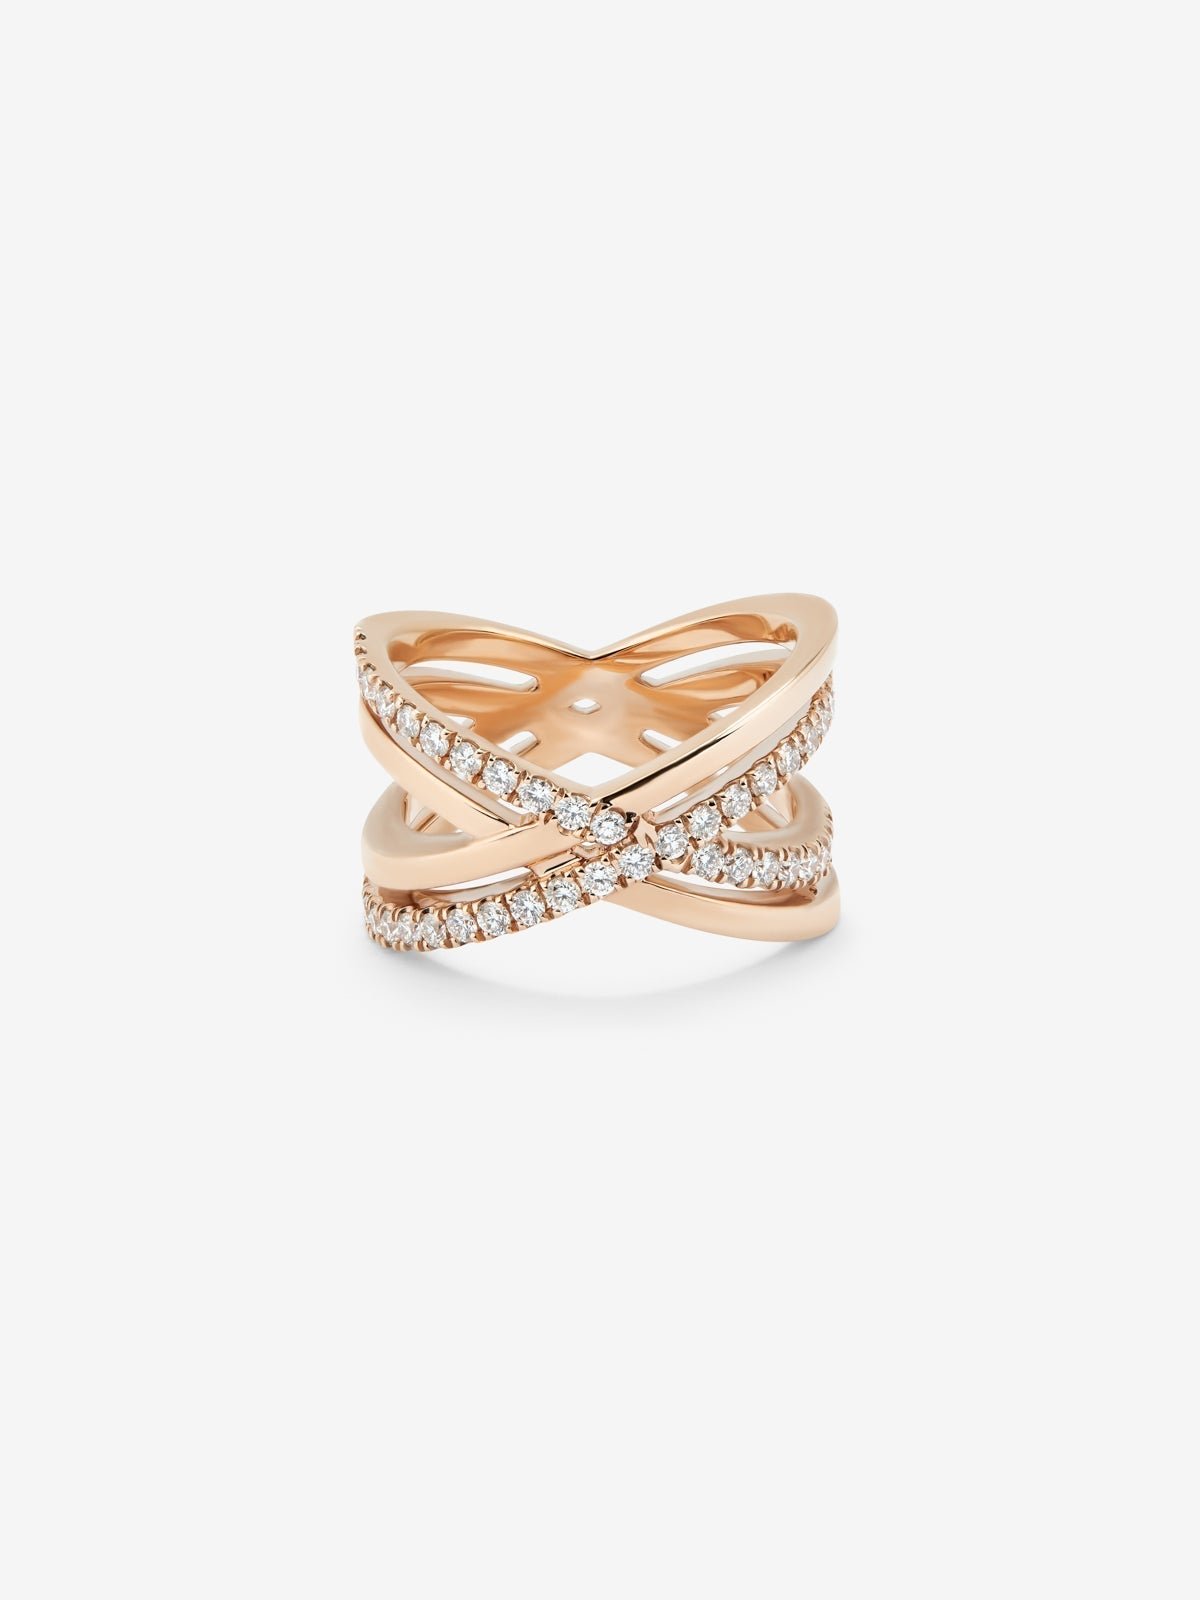 18K rose gold cross ring with 40 brilliant-cut diamonds with a total of 0.56 cts